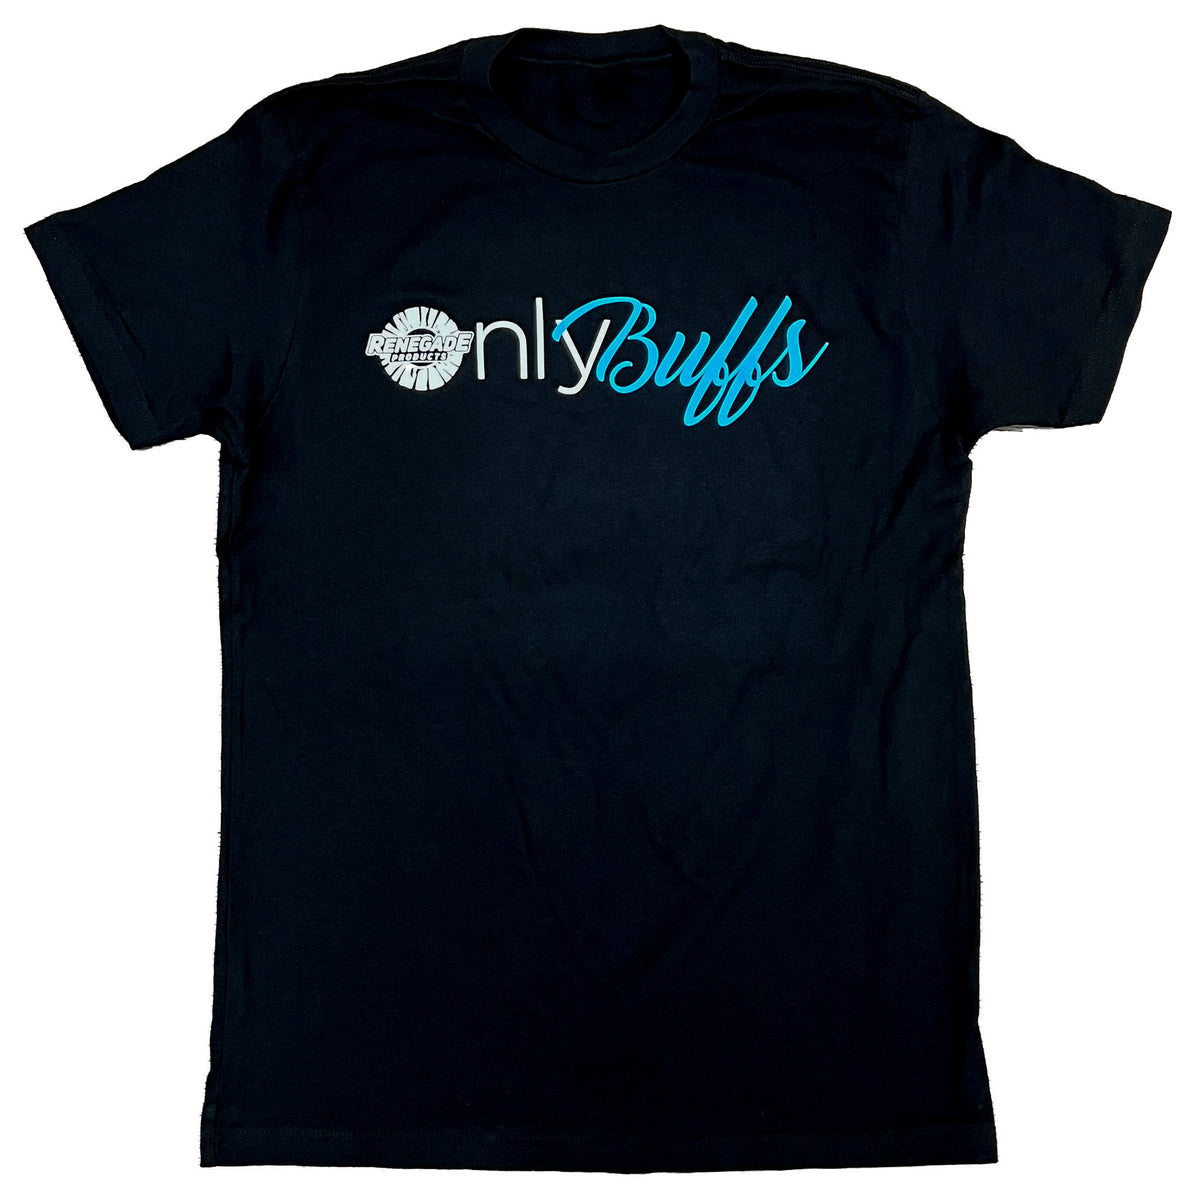 Black shirt featuring &#39;Only Buffs&#39; in white text, displayed against a stark white background